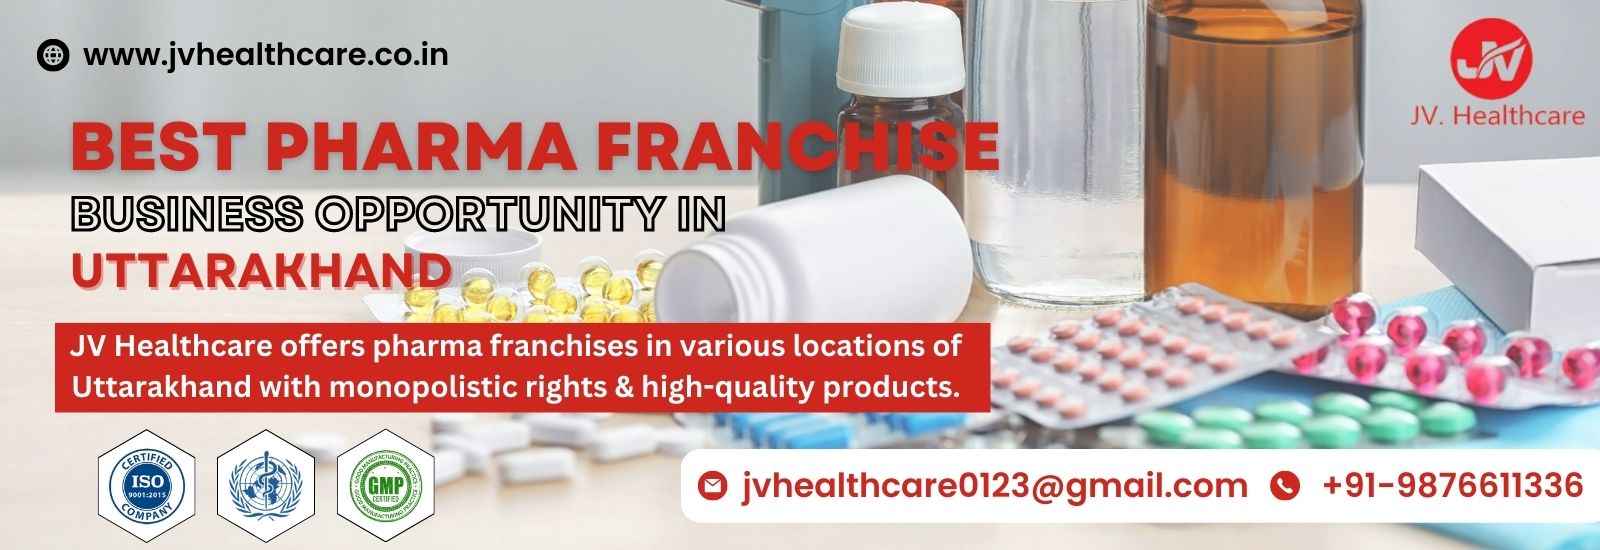 PCD Pharma Franchise Company in Uttarakhand Illustrating itself in the Context of Uniqueness | JV Healthcare